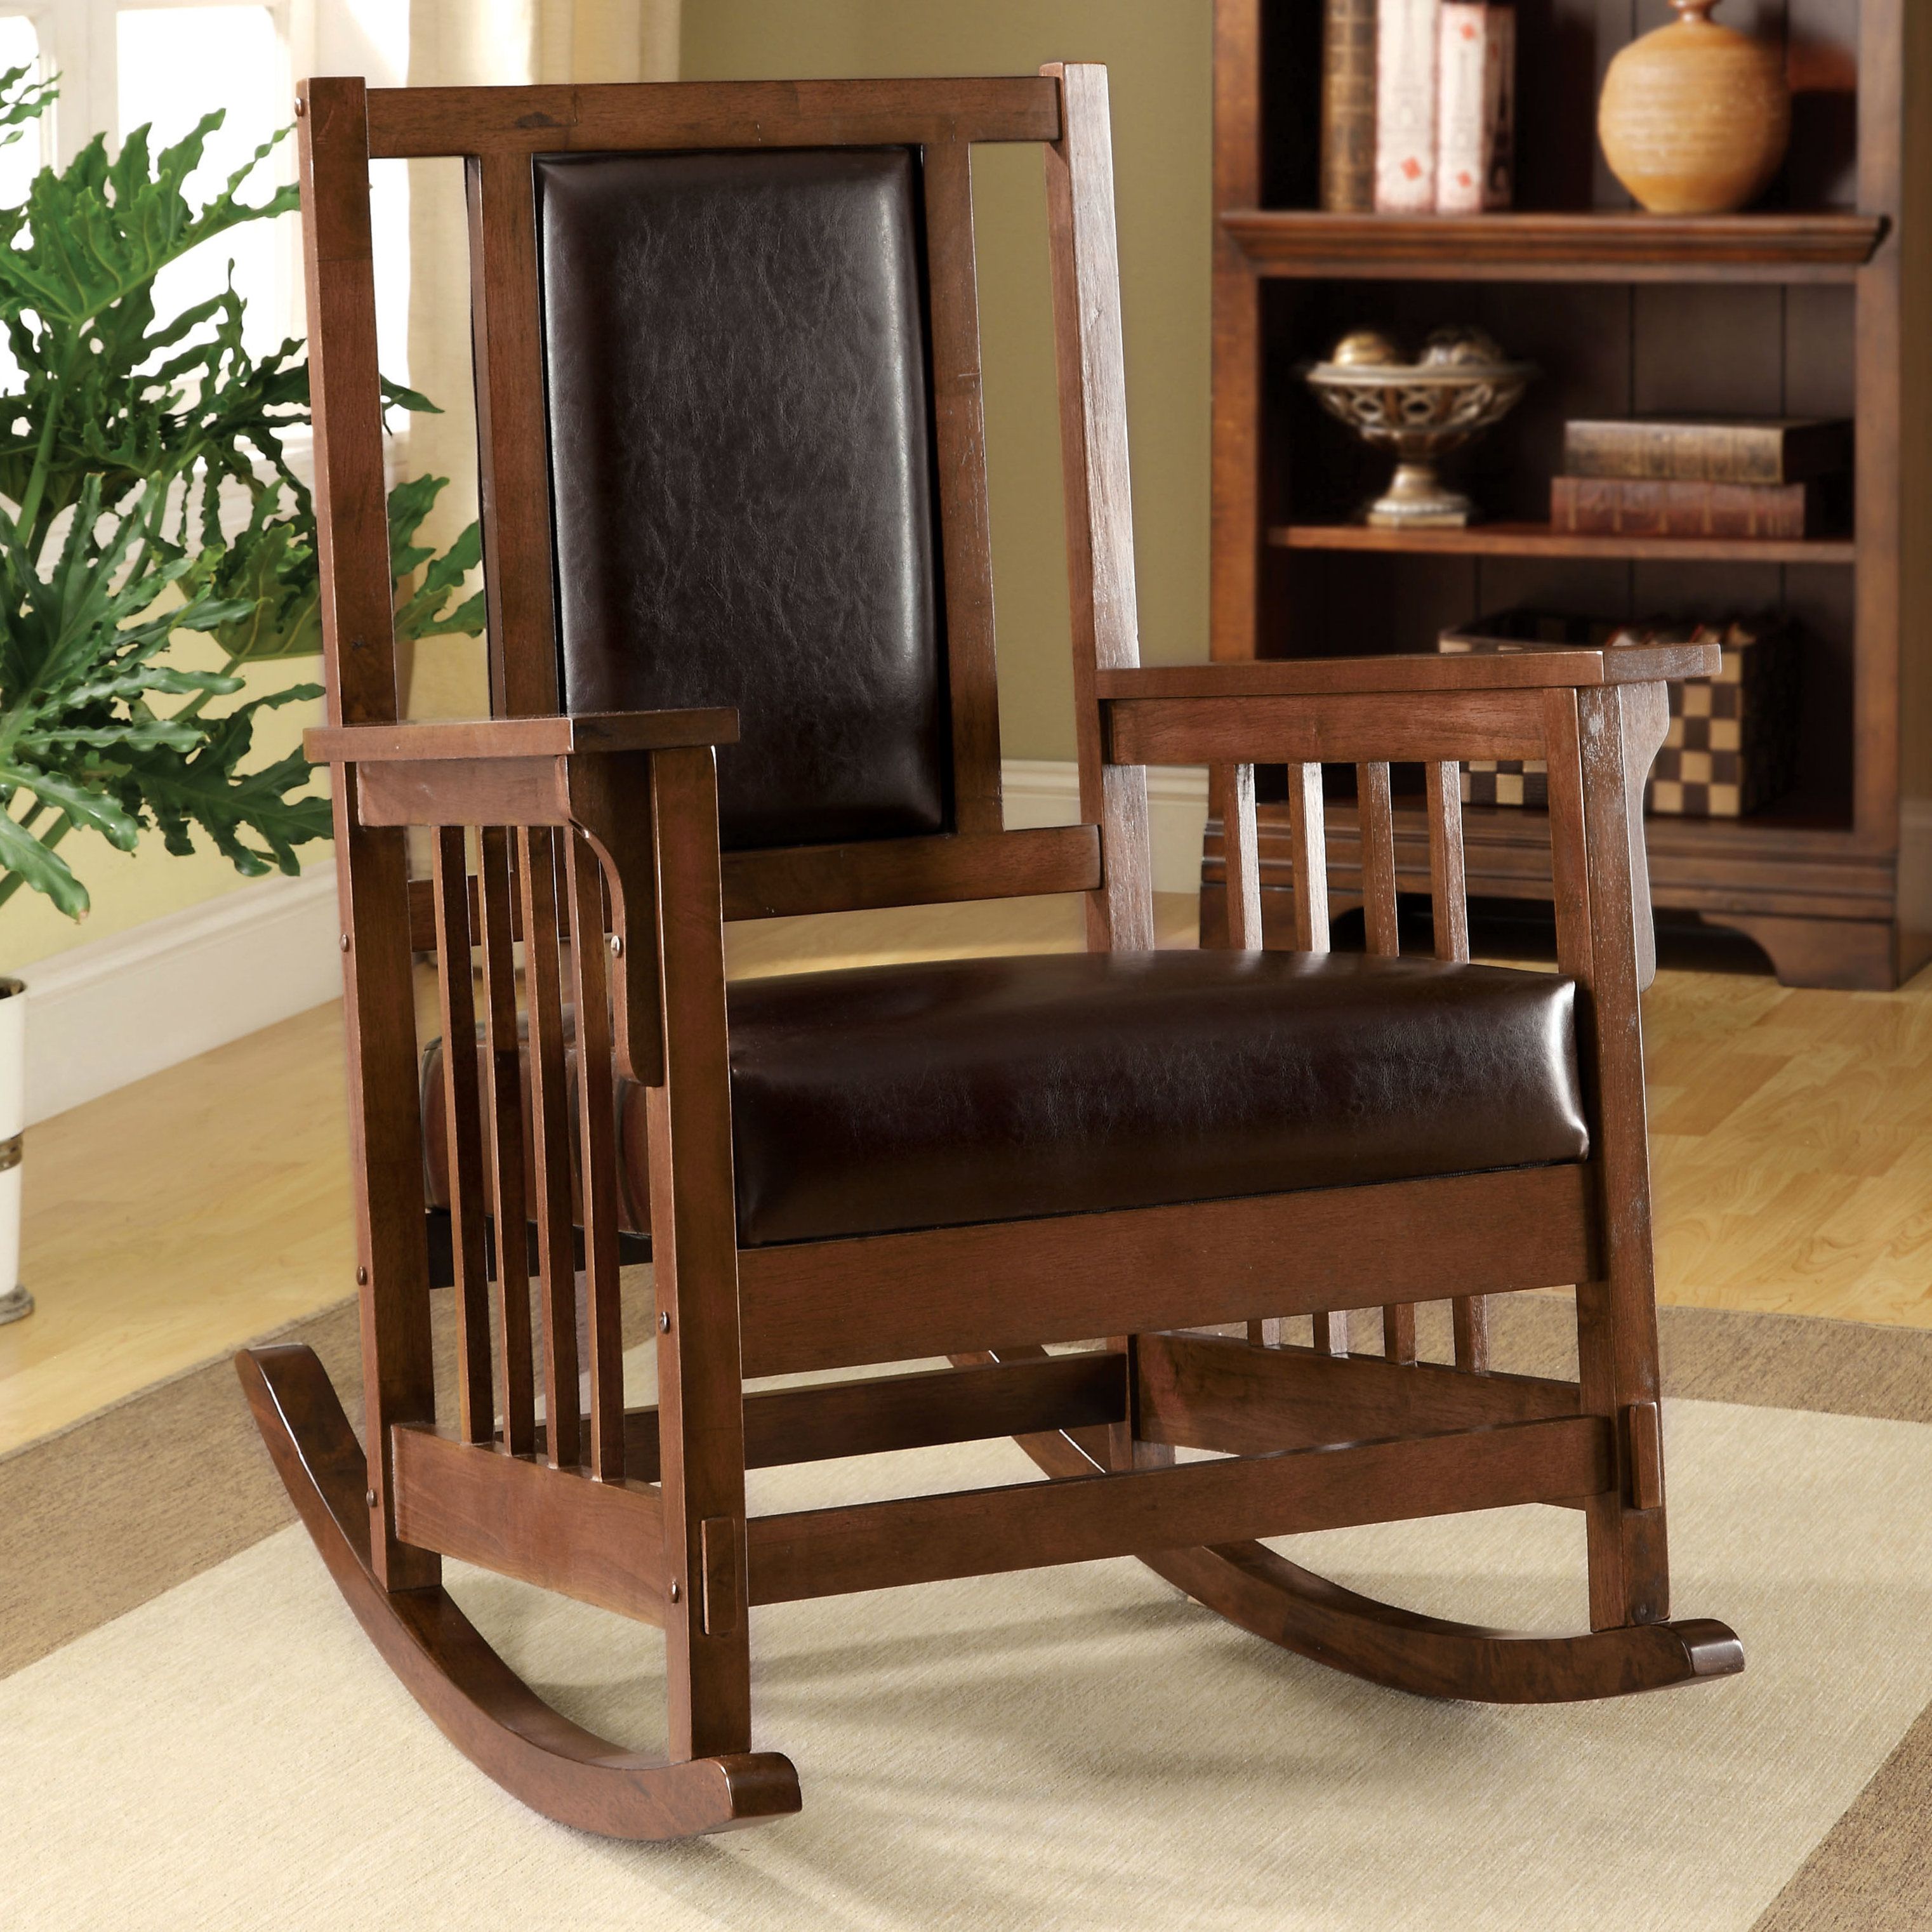 Faux Leather Rocking Chairs You'll Love In 2019 | Wayfair Regarding Mission Design Wood Rocking Chairs With Brown Leather Seat (View 11 of 20)